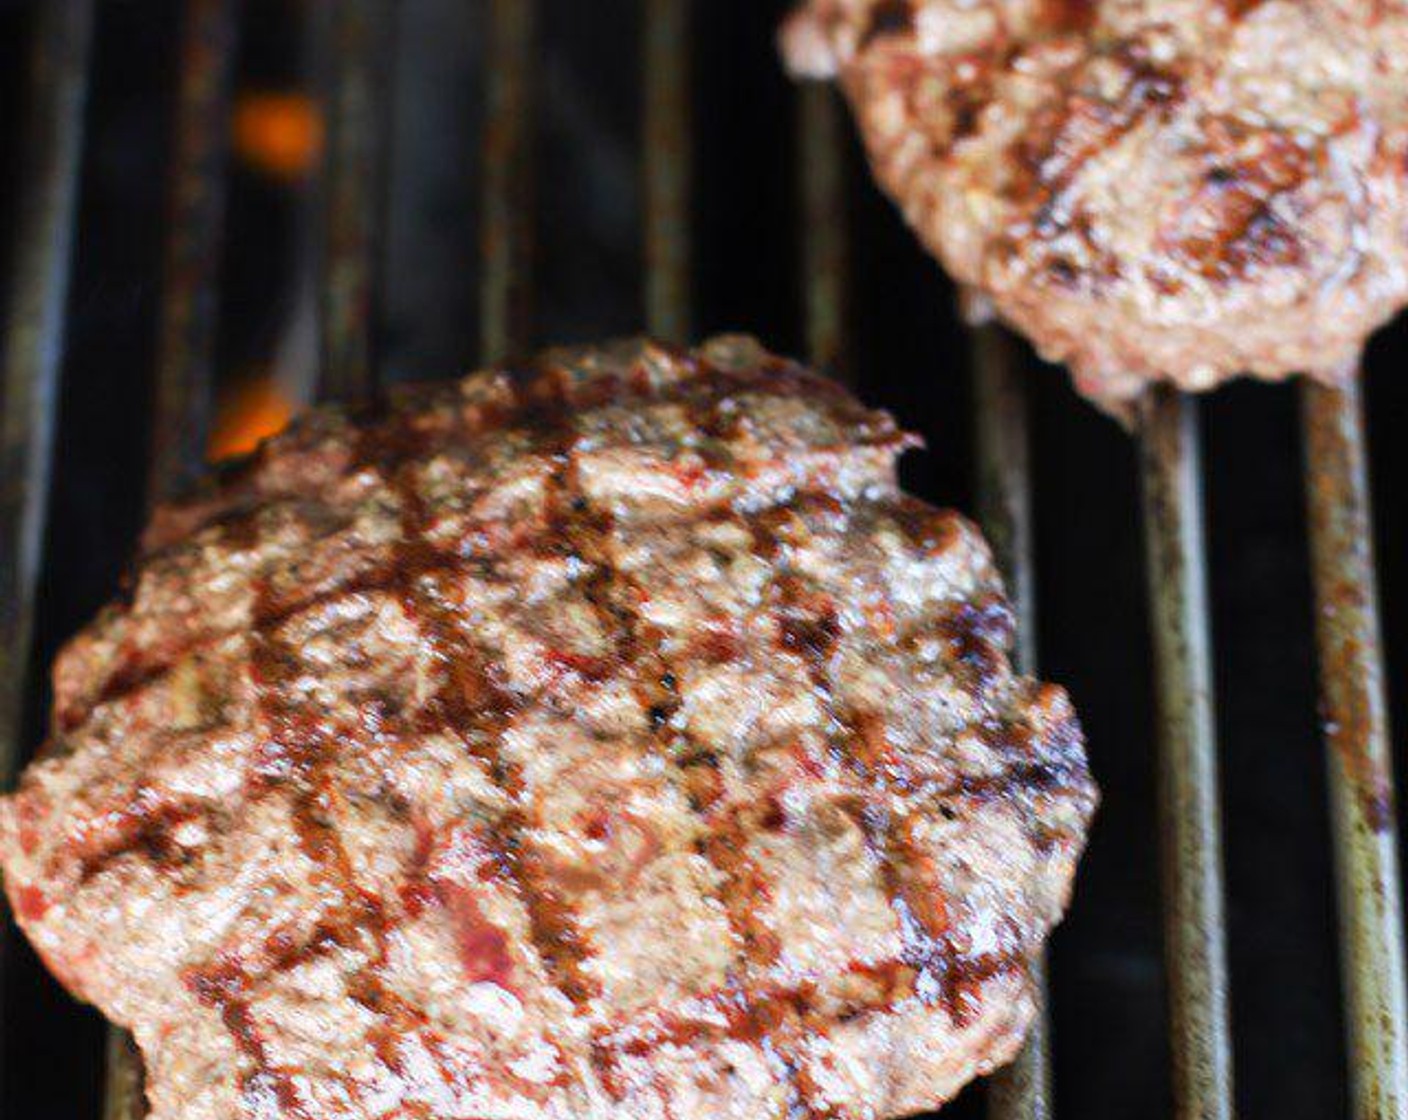 step 5 Divide 85/15 Lean Ground Beef (2 lb) into 4 portions and form into patties with hands. Use wax paper as surface to form patties. Start grilling burgers to your perfection.